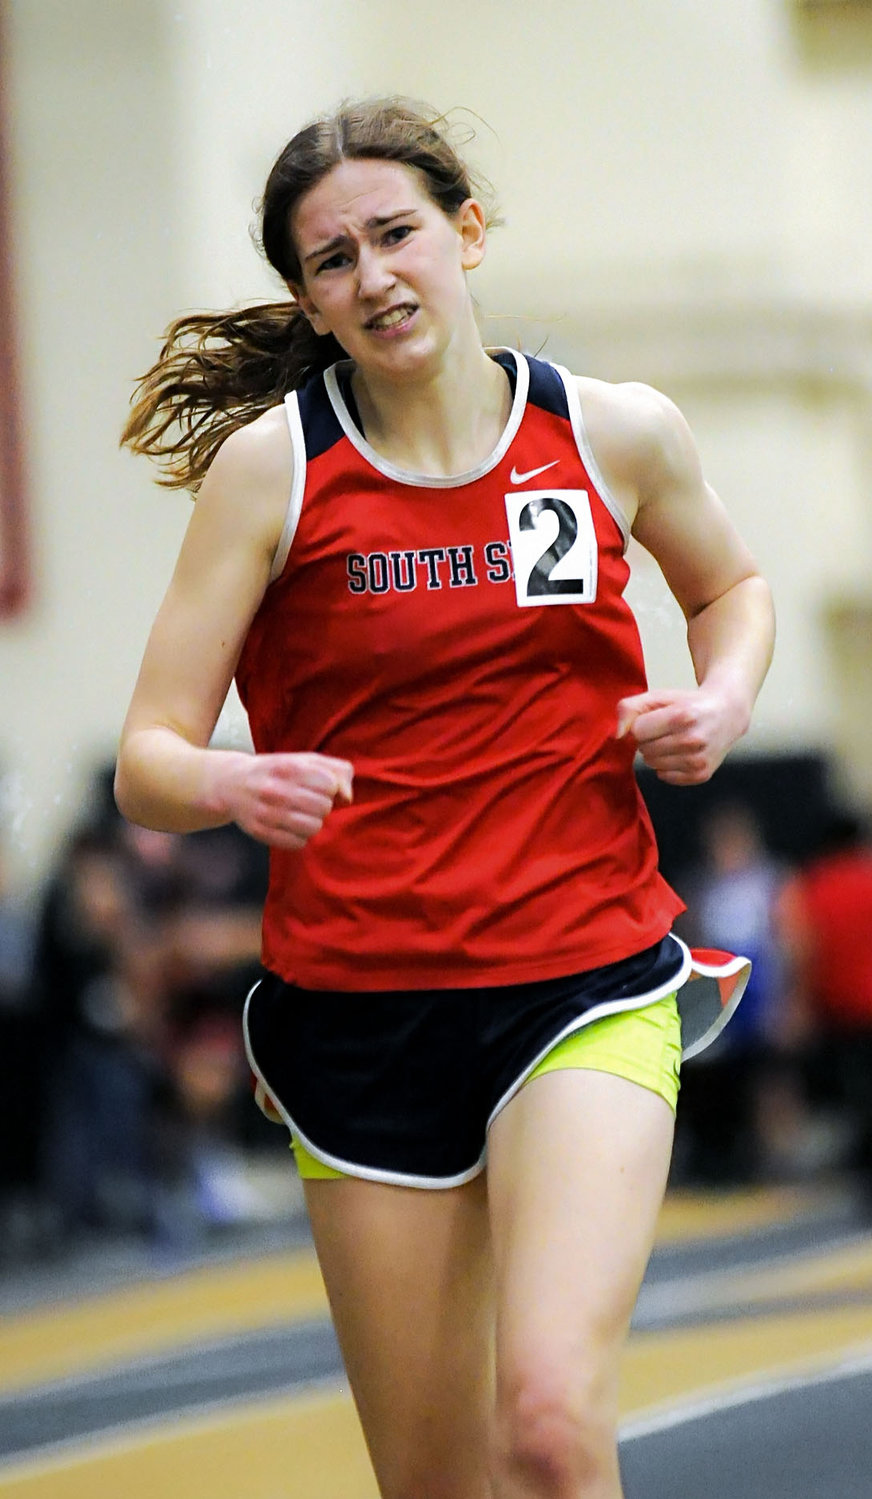 Carly Woelfel, the team’s captain, was also a county champion in the 3,000-meter race.